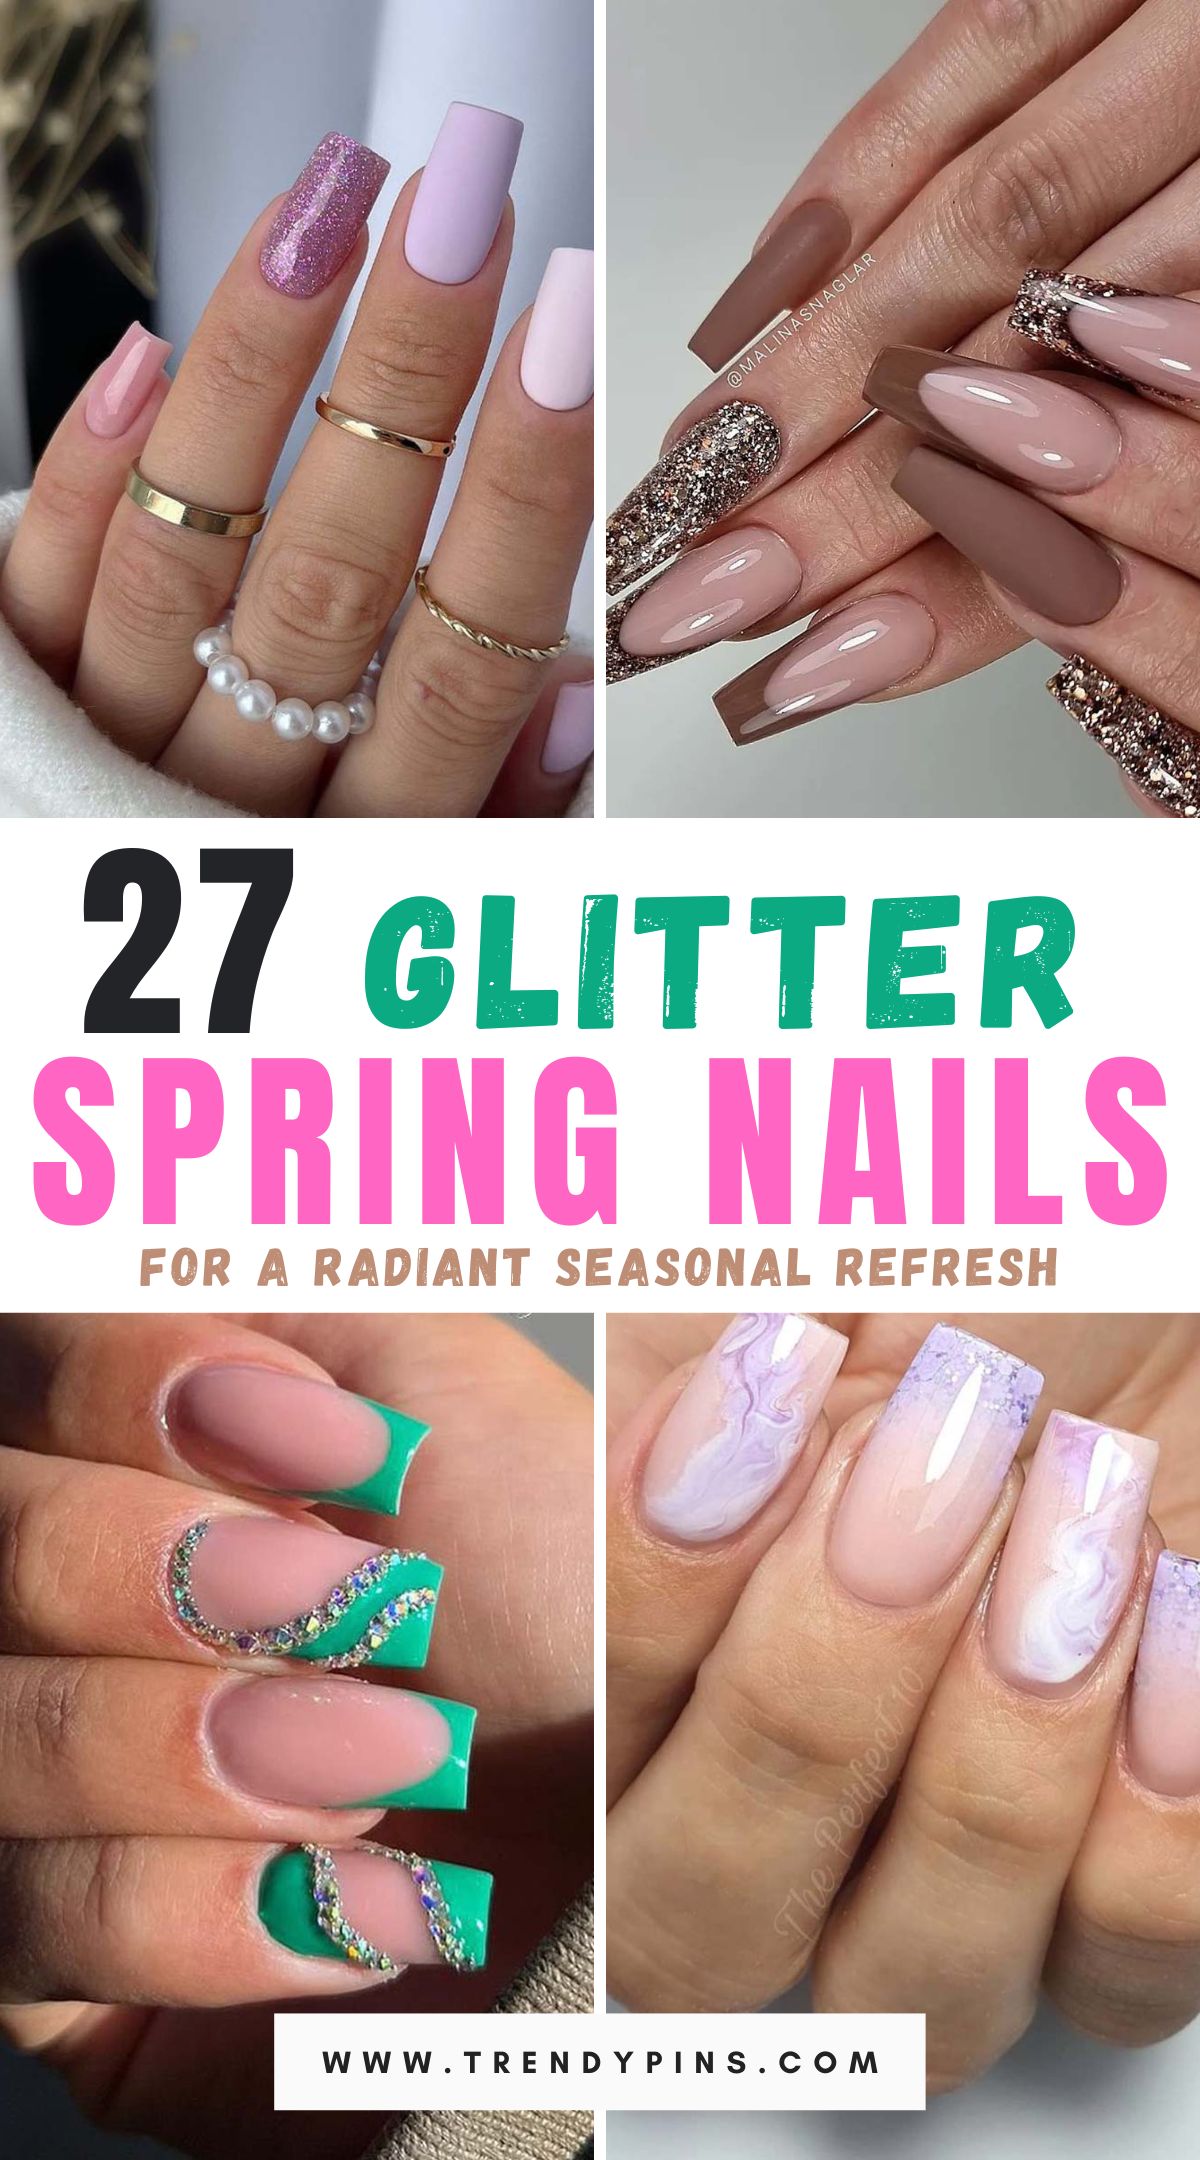 Discover 27 glittery spring nail designs that'll make your manicure sparkle. Perfect for anyone looking to shine this season.